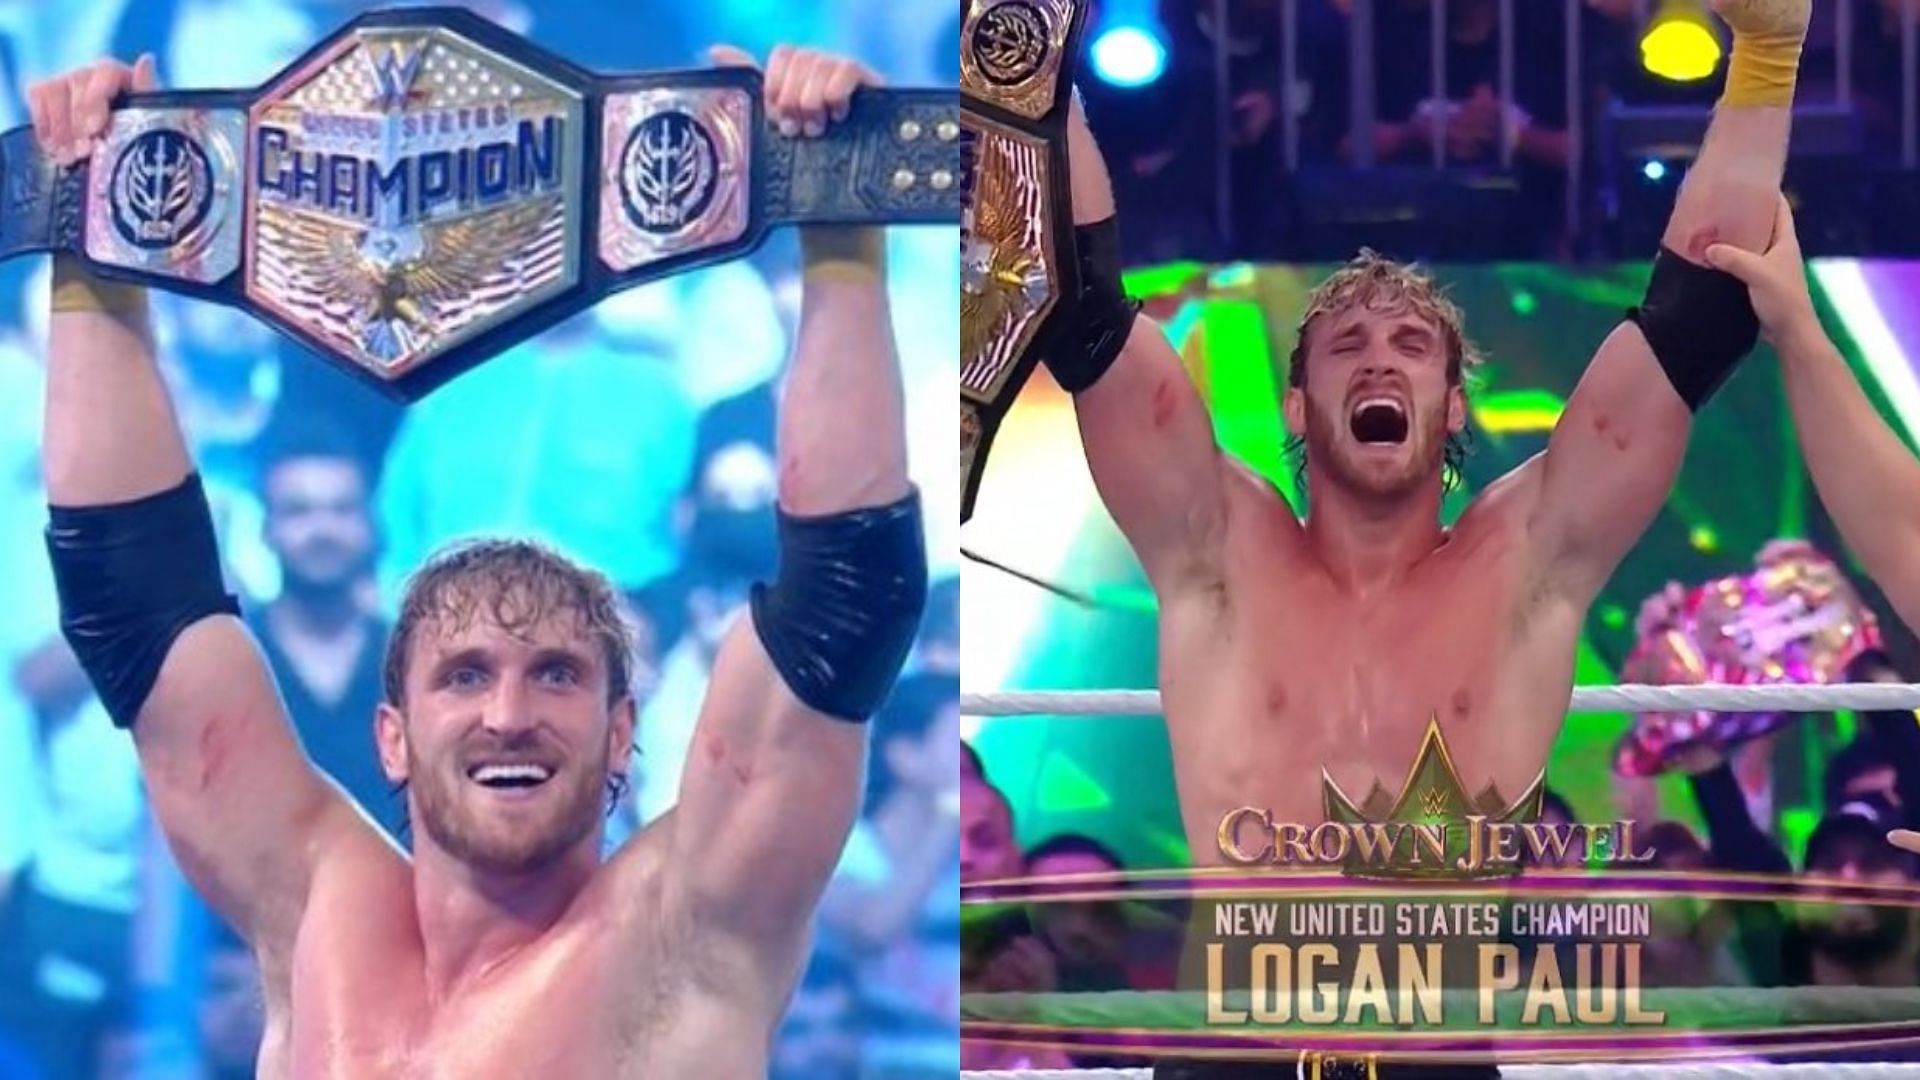 The Social Media Megastar won his first title in WWE at Crown Jewel 2023